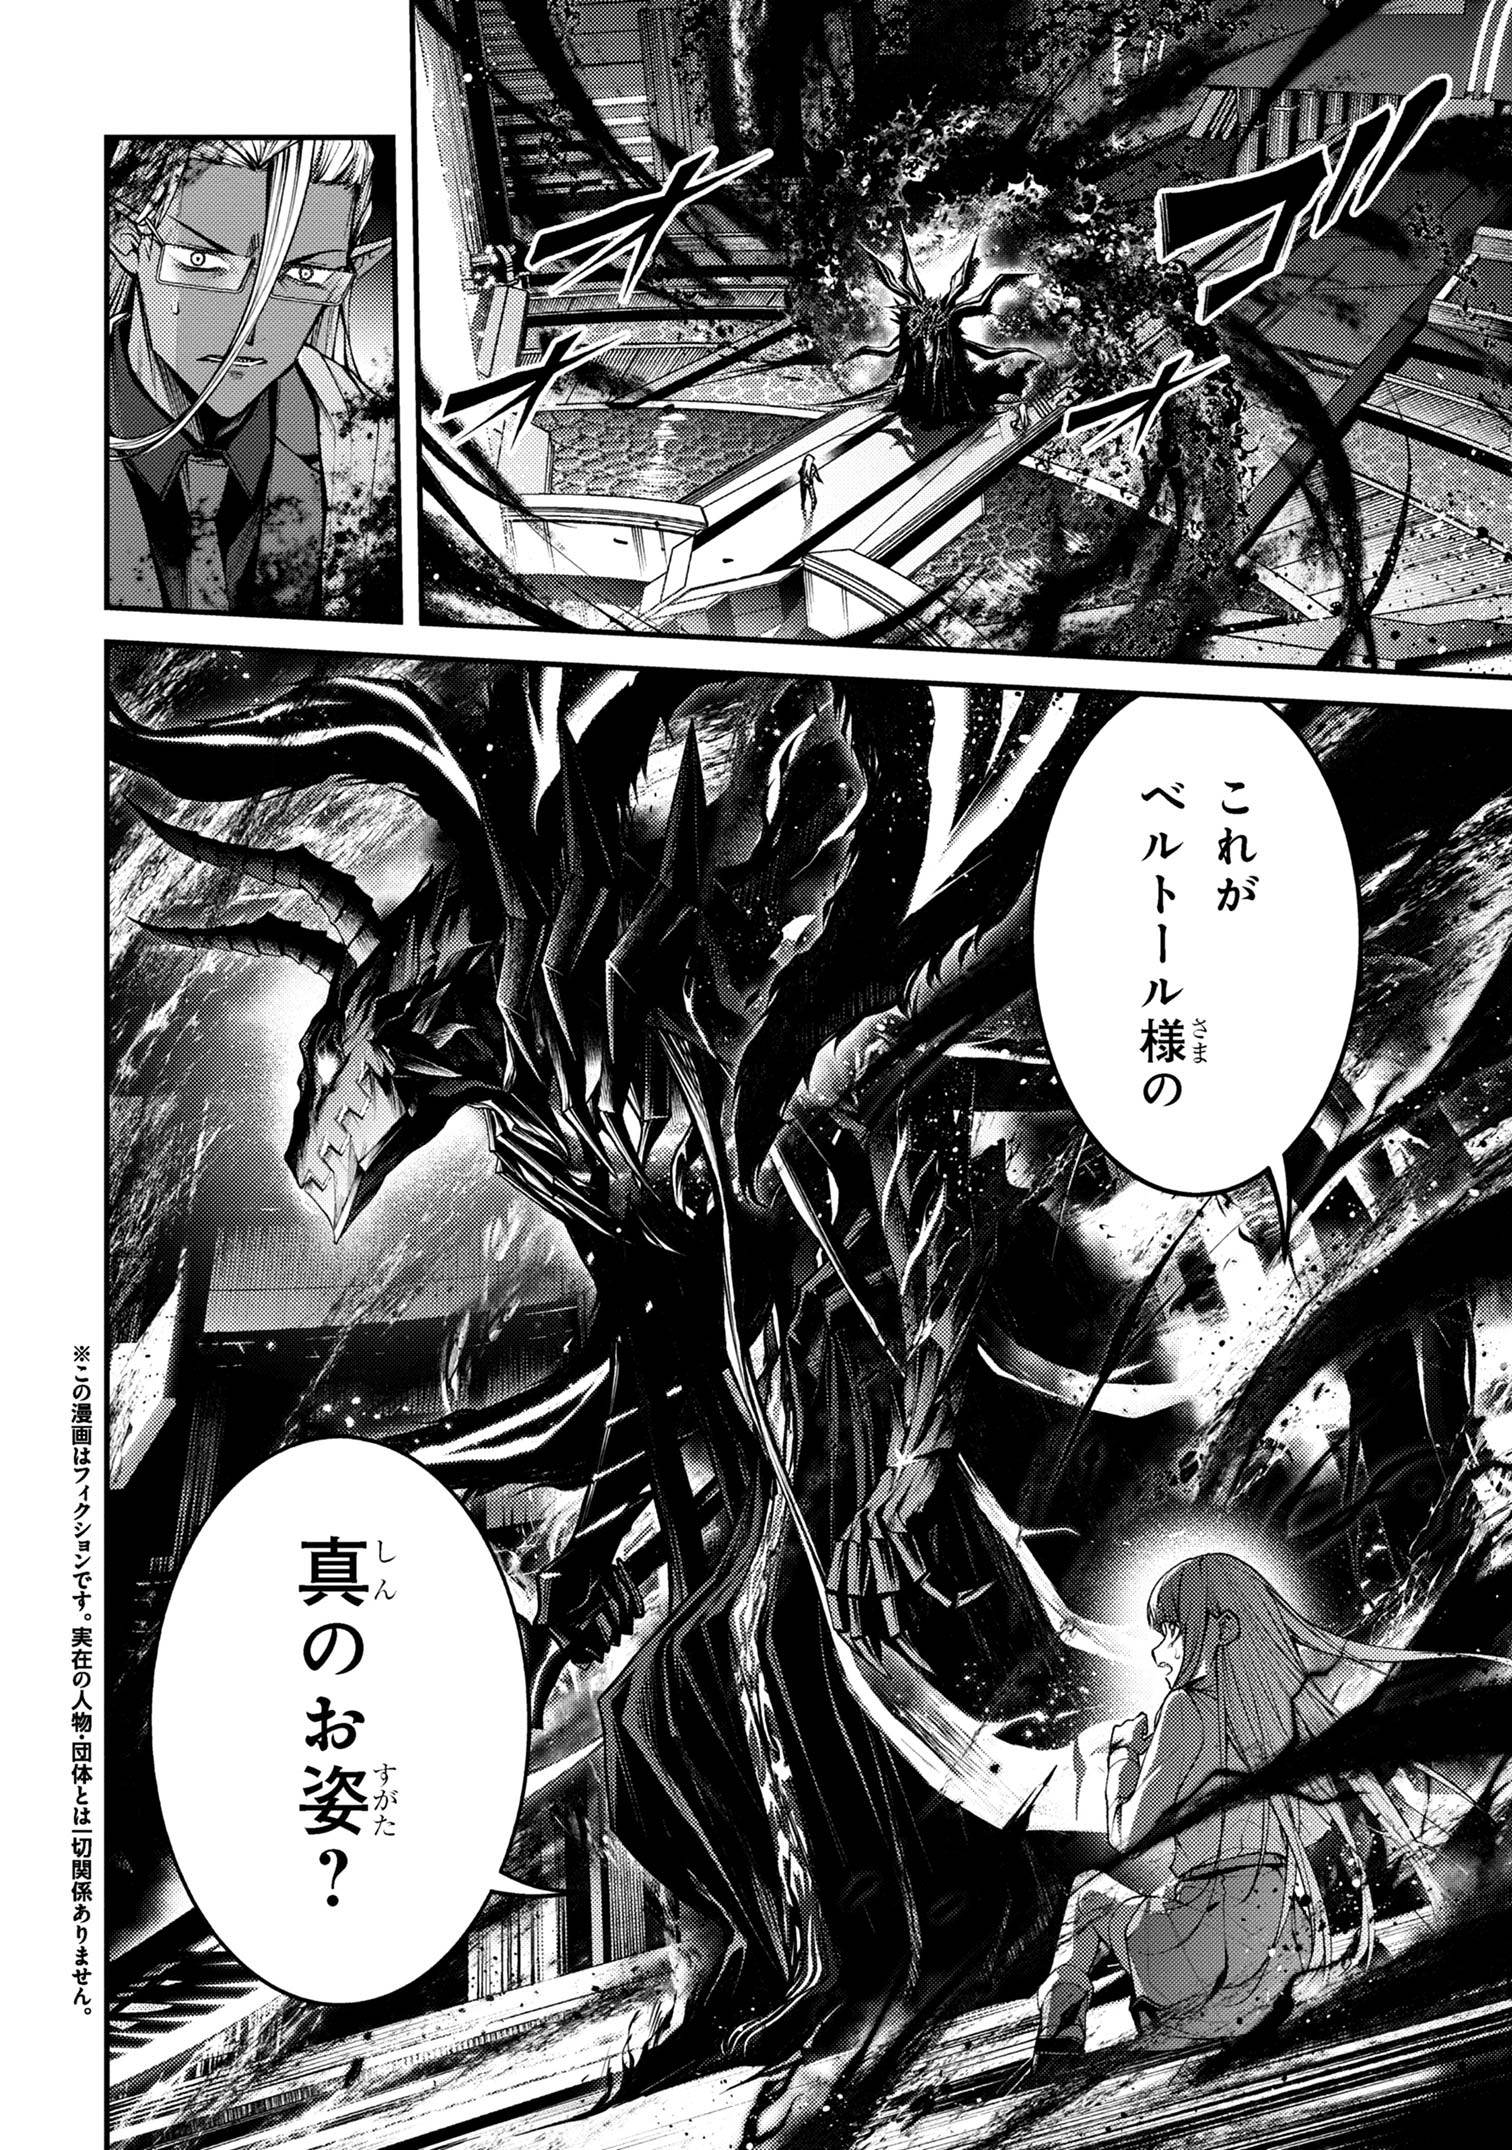 Maou 2099 - Chapter 14.1 - Page 2